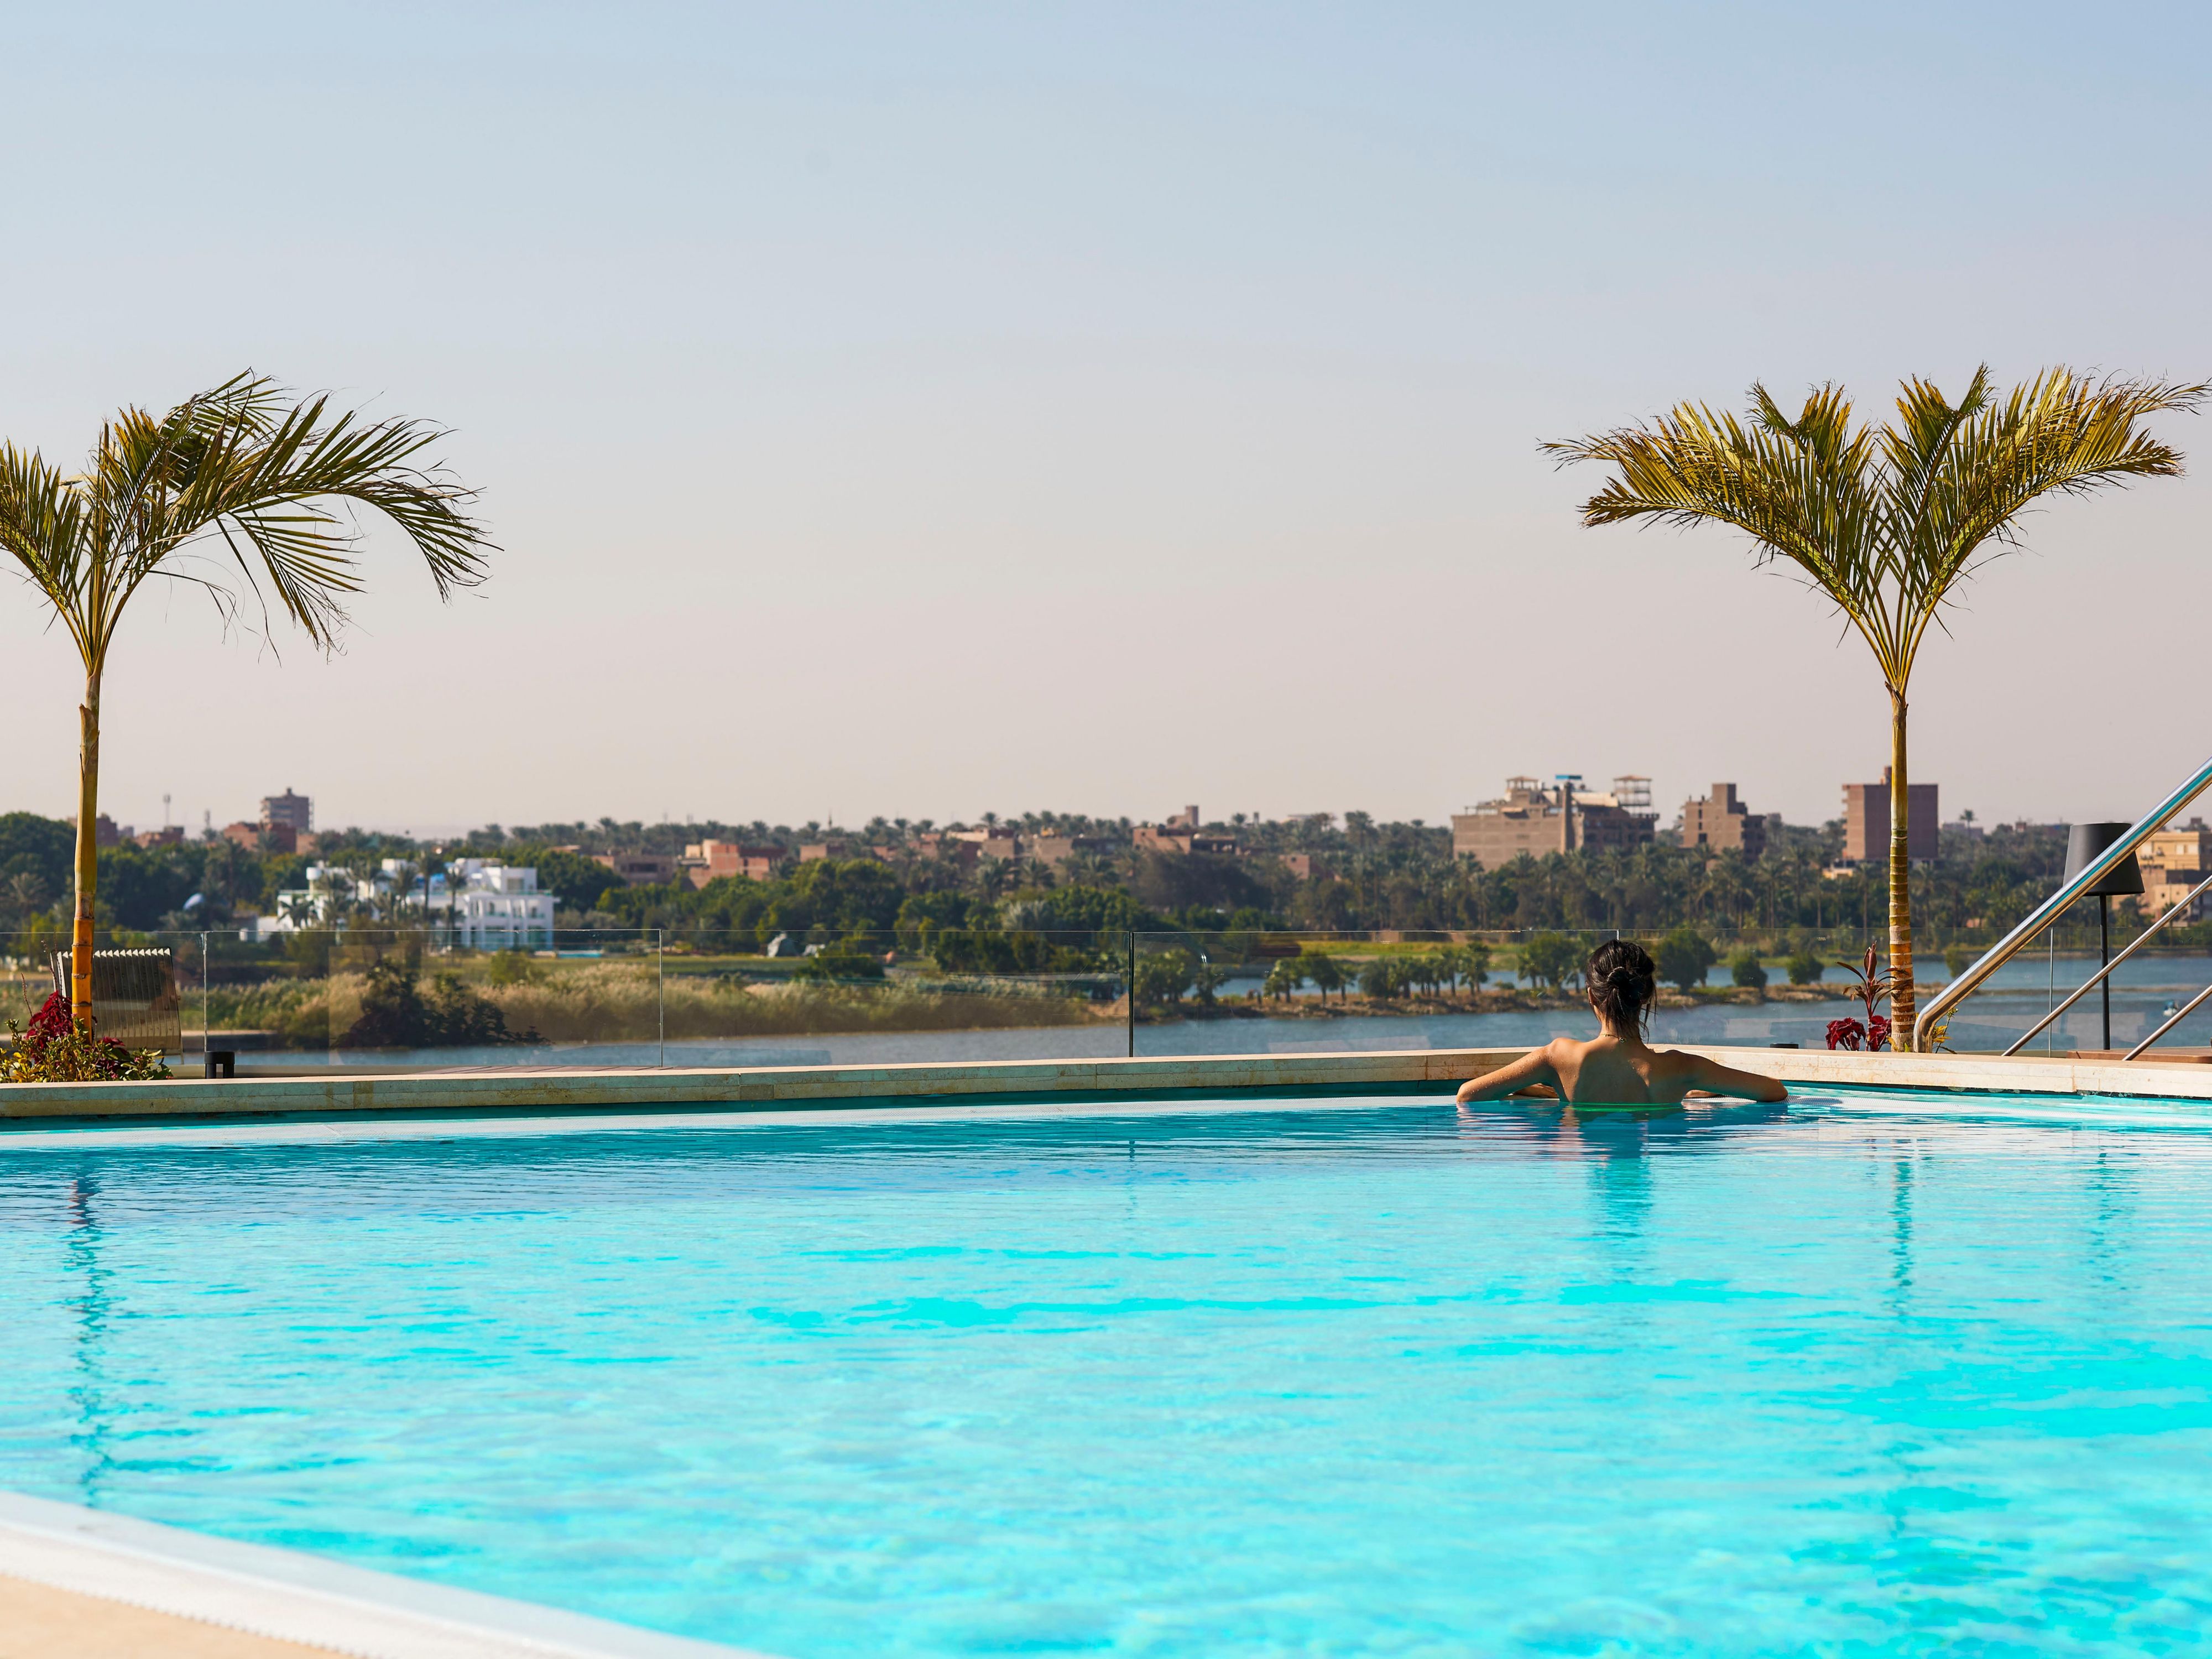 Dive your worries away by our very special infinity pool & relish in the exceptional views of the Nile. Relax & unwind by the serenity of the pool and the view. Sunny days are made perfect by the pool & cool weather is even better while swimming in the heated pool. Order your favourite cocktail & light snacks to compliment your mood ideally.